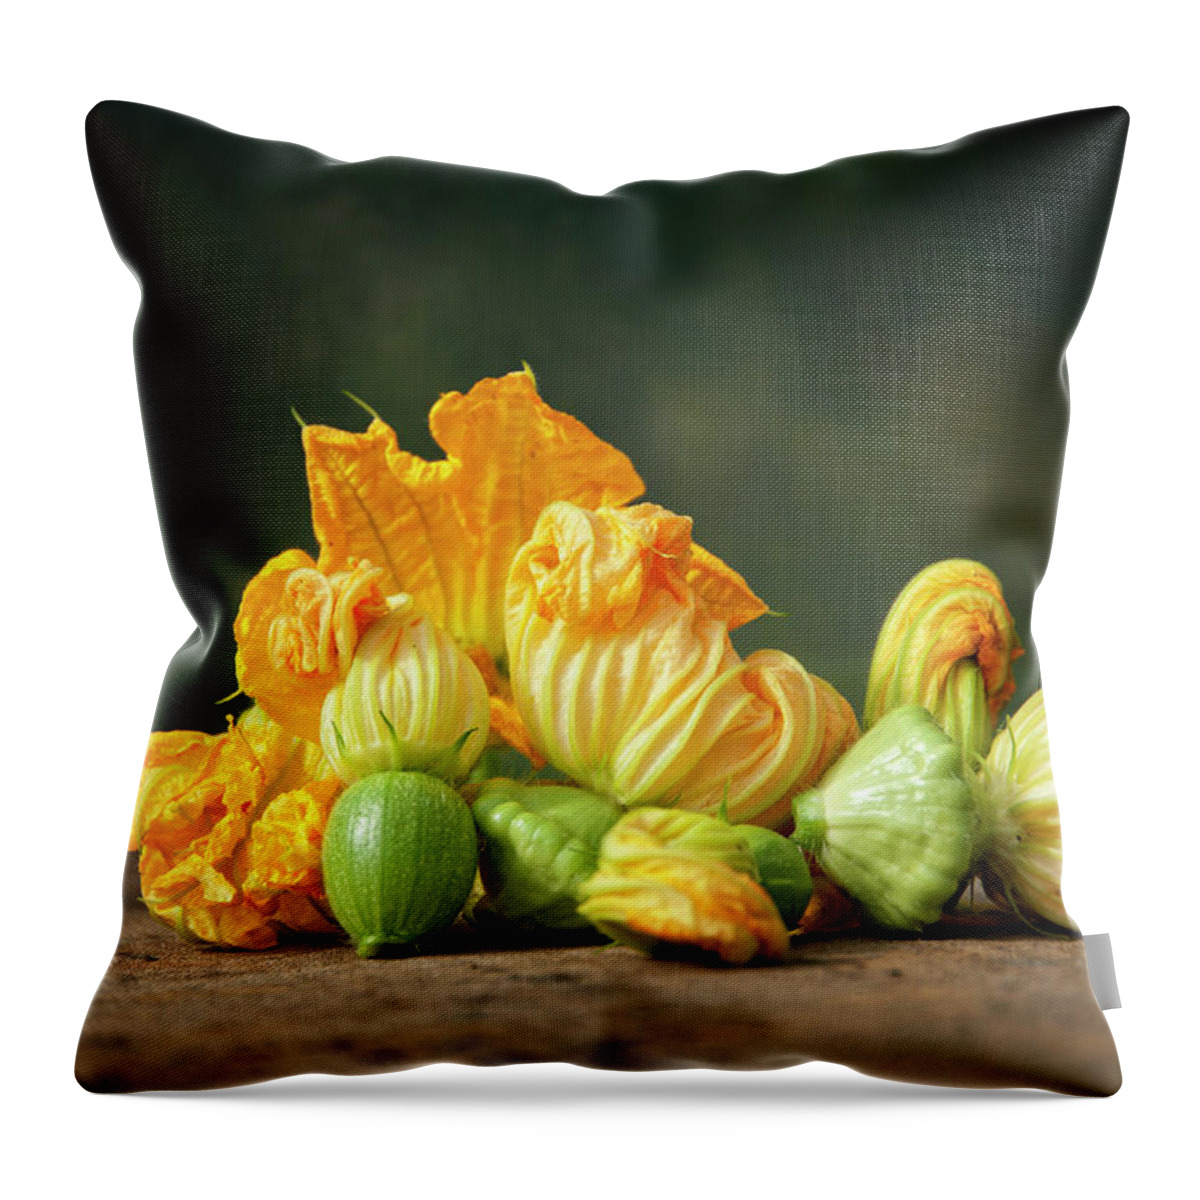 Healthy Eating Throw Pillow featuring the photograph Patty Pans by Jojo1 Photography